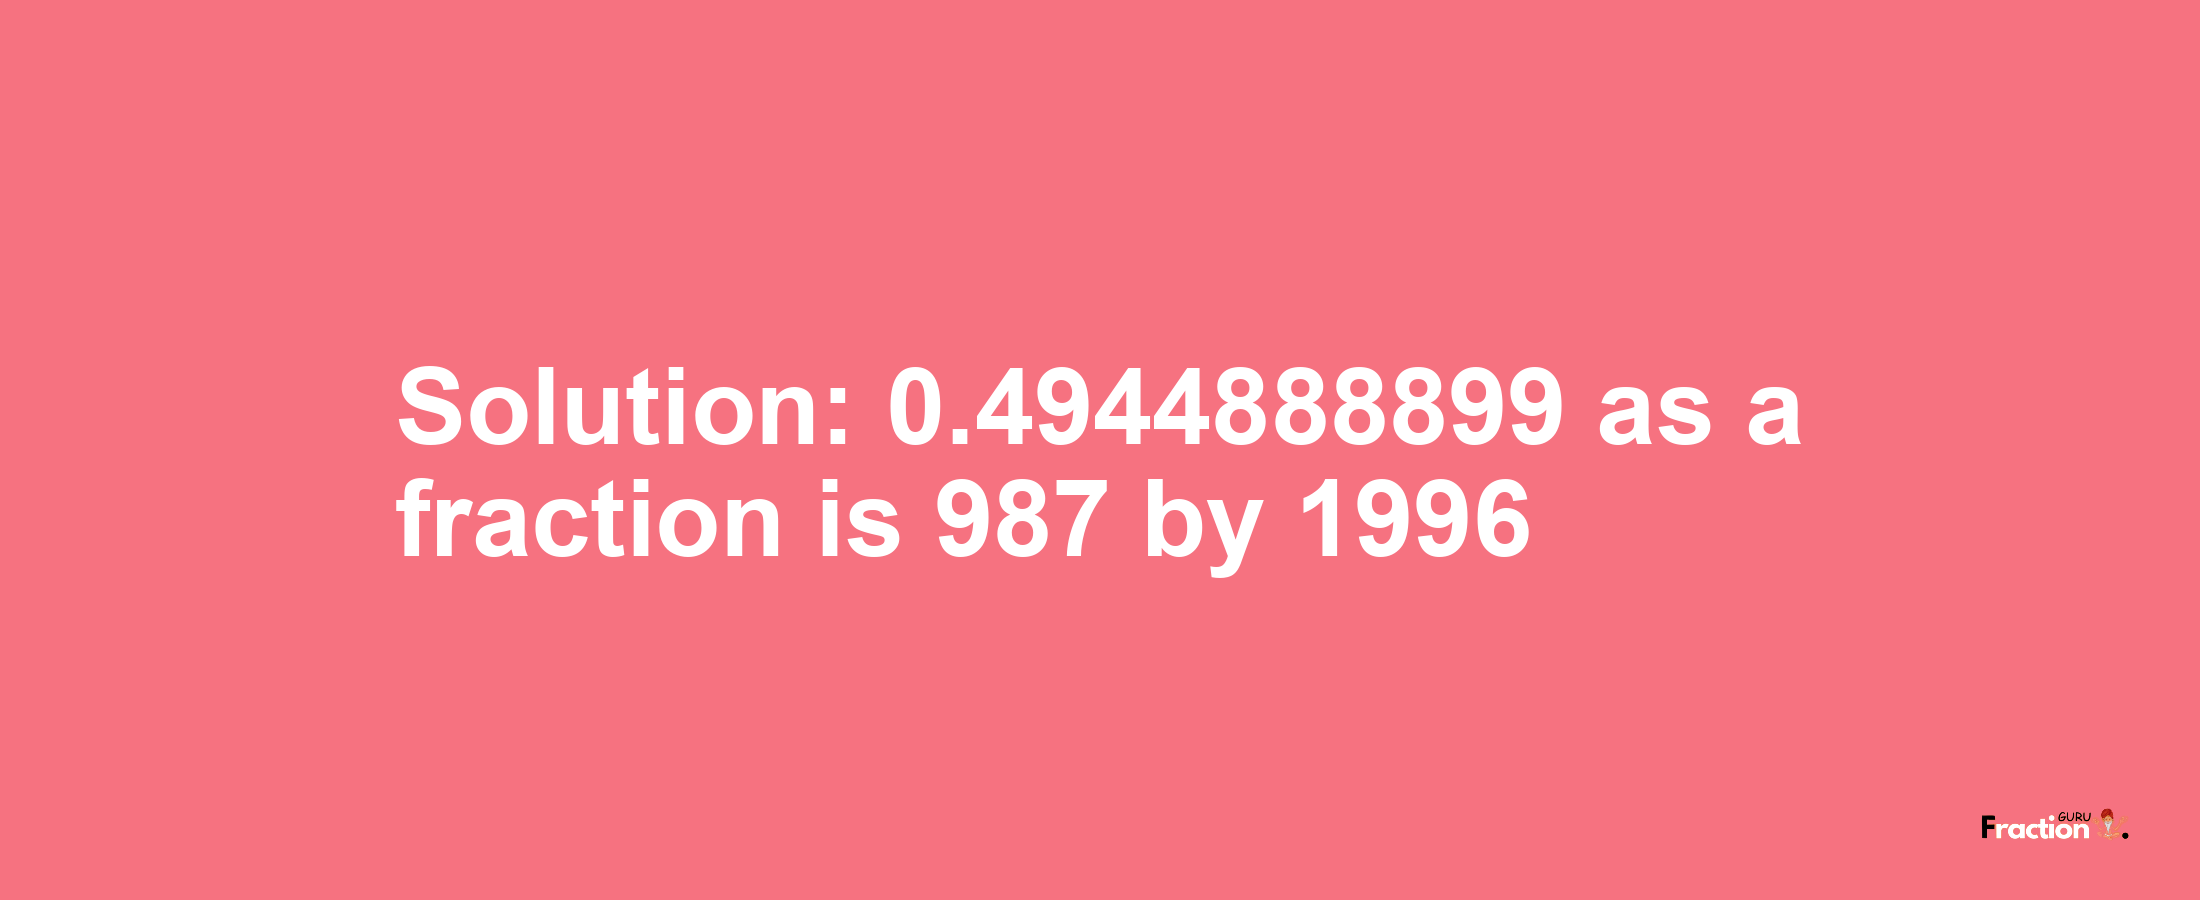 Solution:0.4944888899 as a fraction is 987/1996